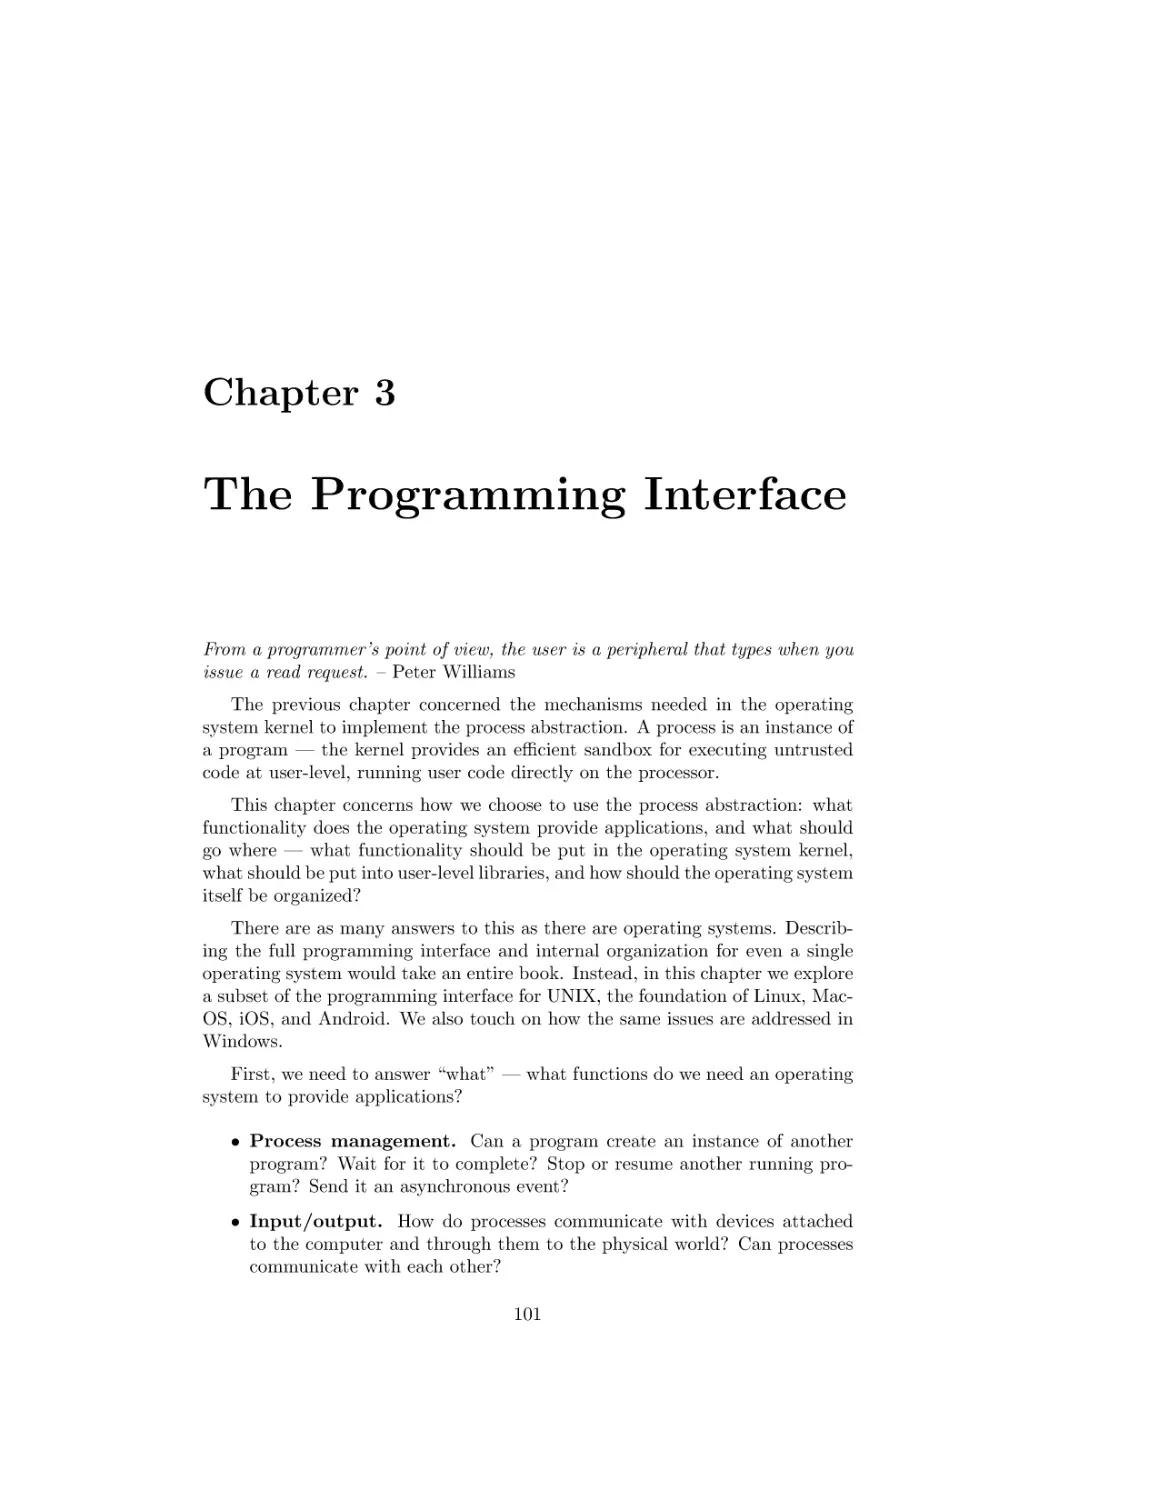 The Programming Interface